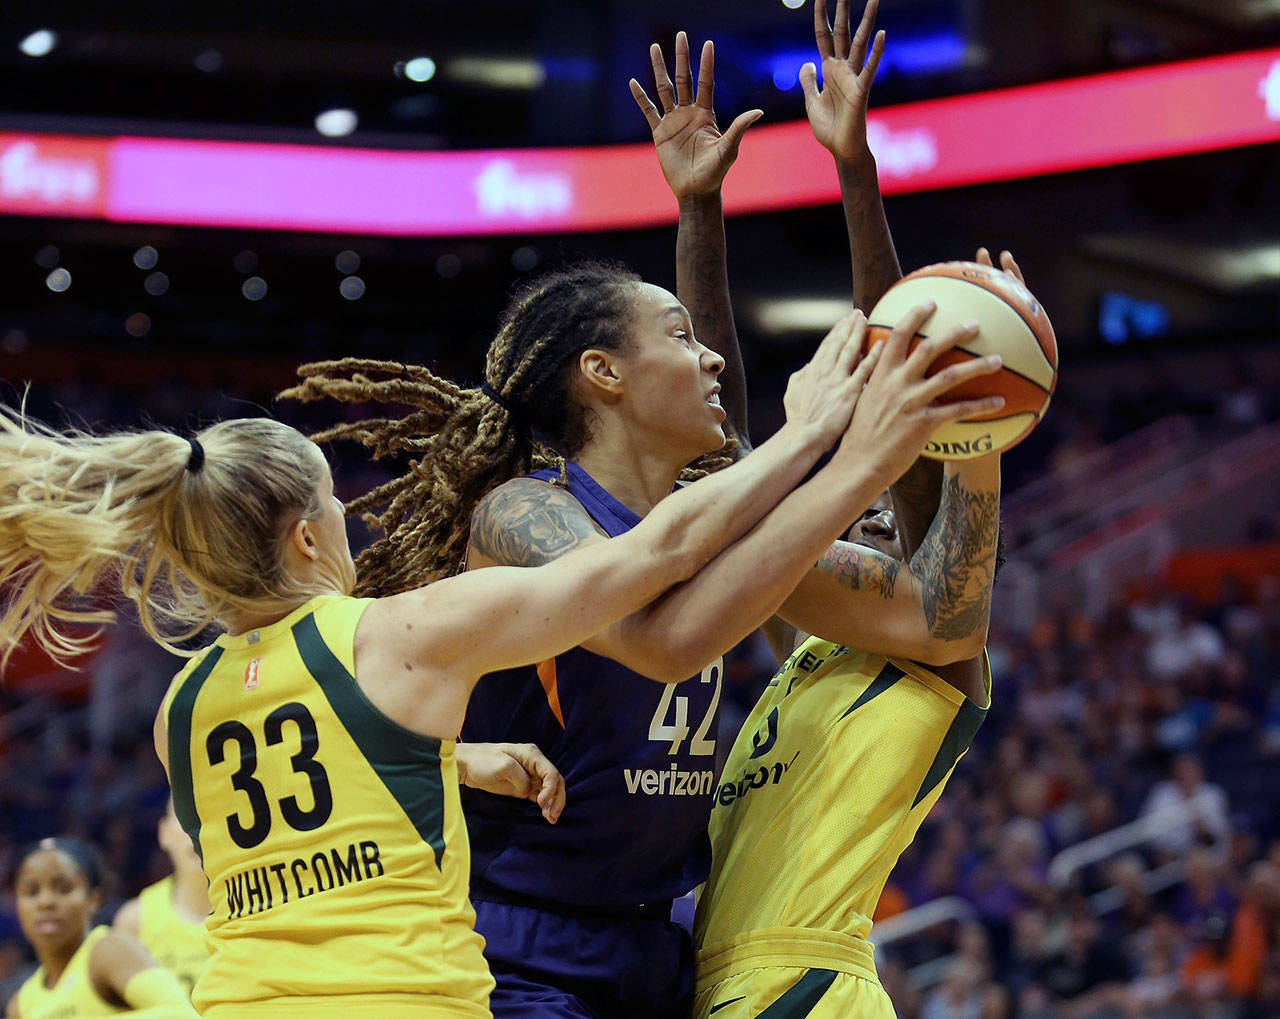 Phoenix Mercury center Brittney Griner (42) is guarded by Seattle Storm’s Sami Whitcomb (33) and Natasha Howard as she tries to drive to the basket during the first half of Game 4 of their WNBA semifinal series Sunday in Phoenix. (AP Photo/Ralph Freso)